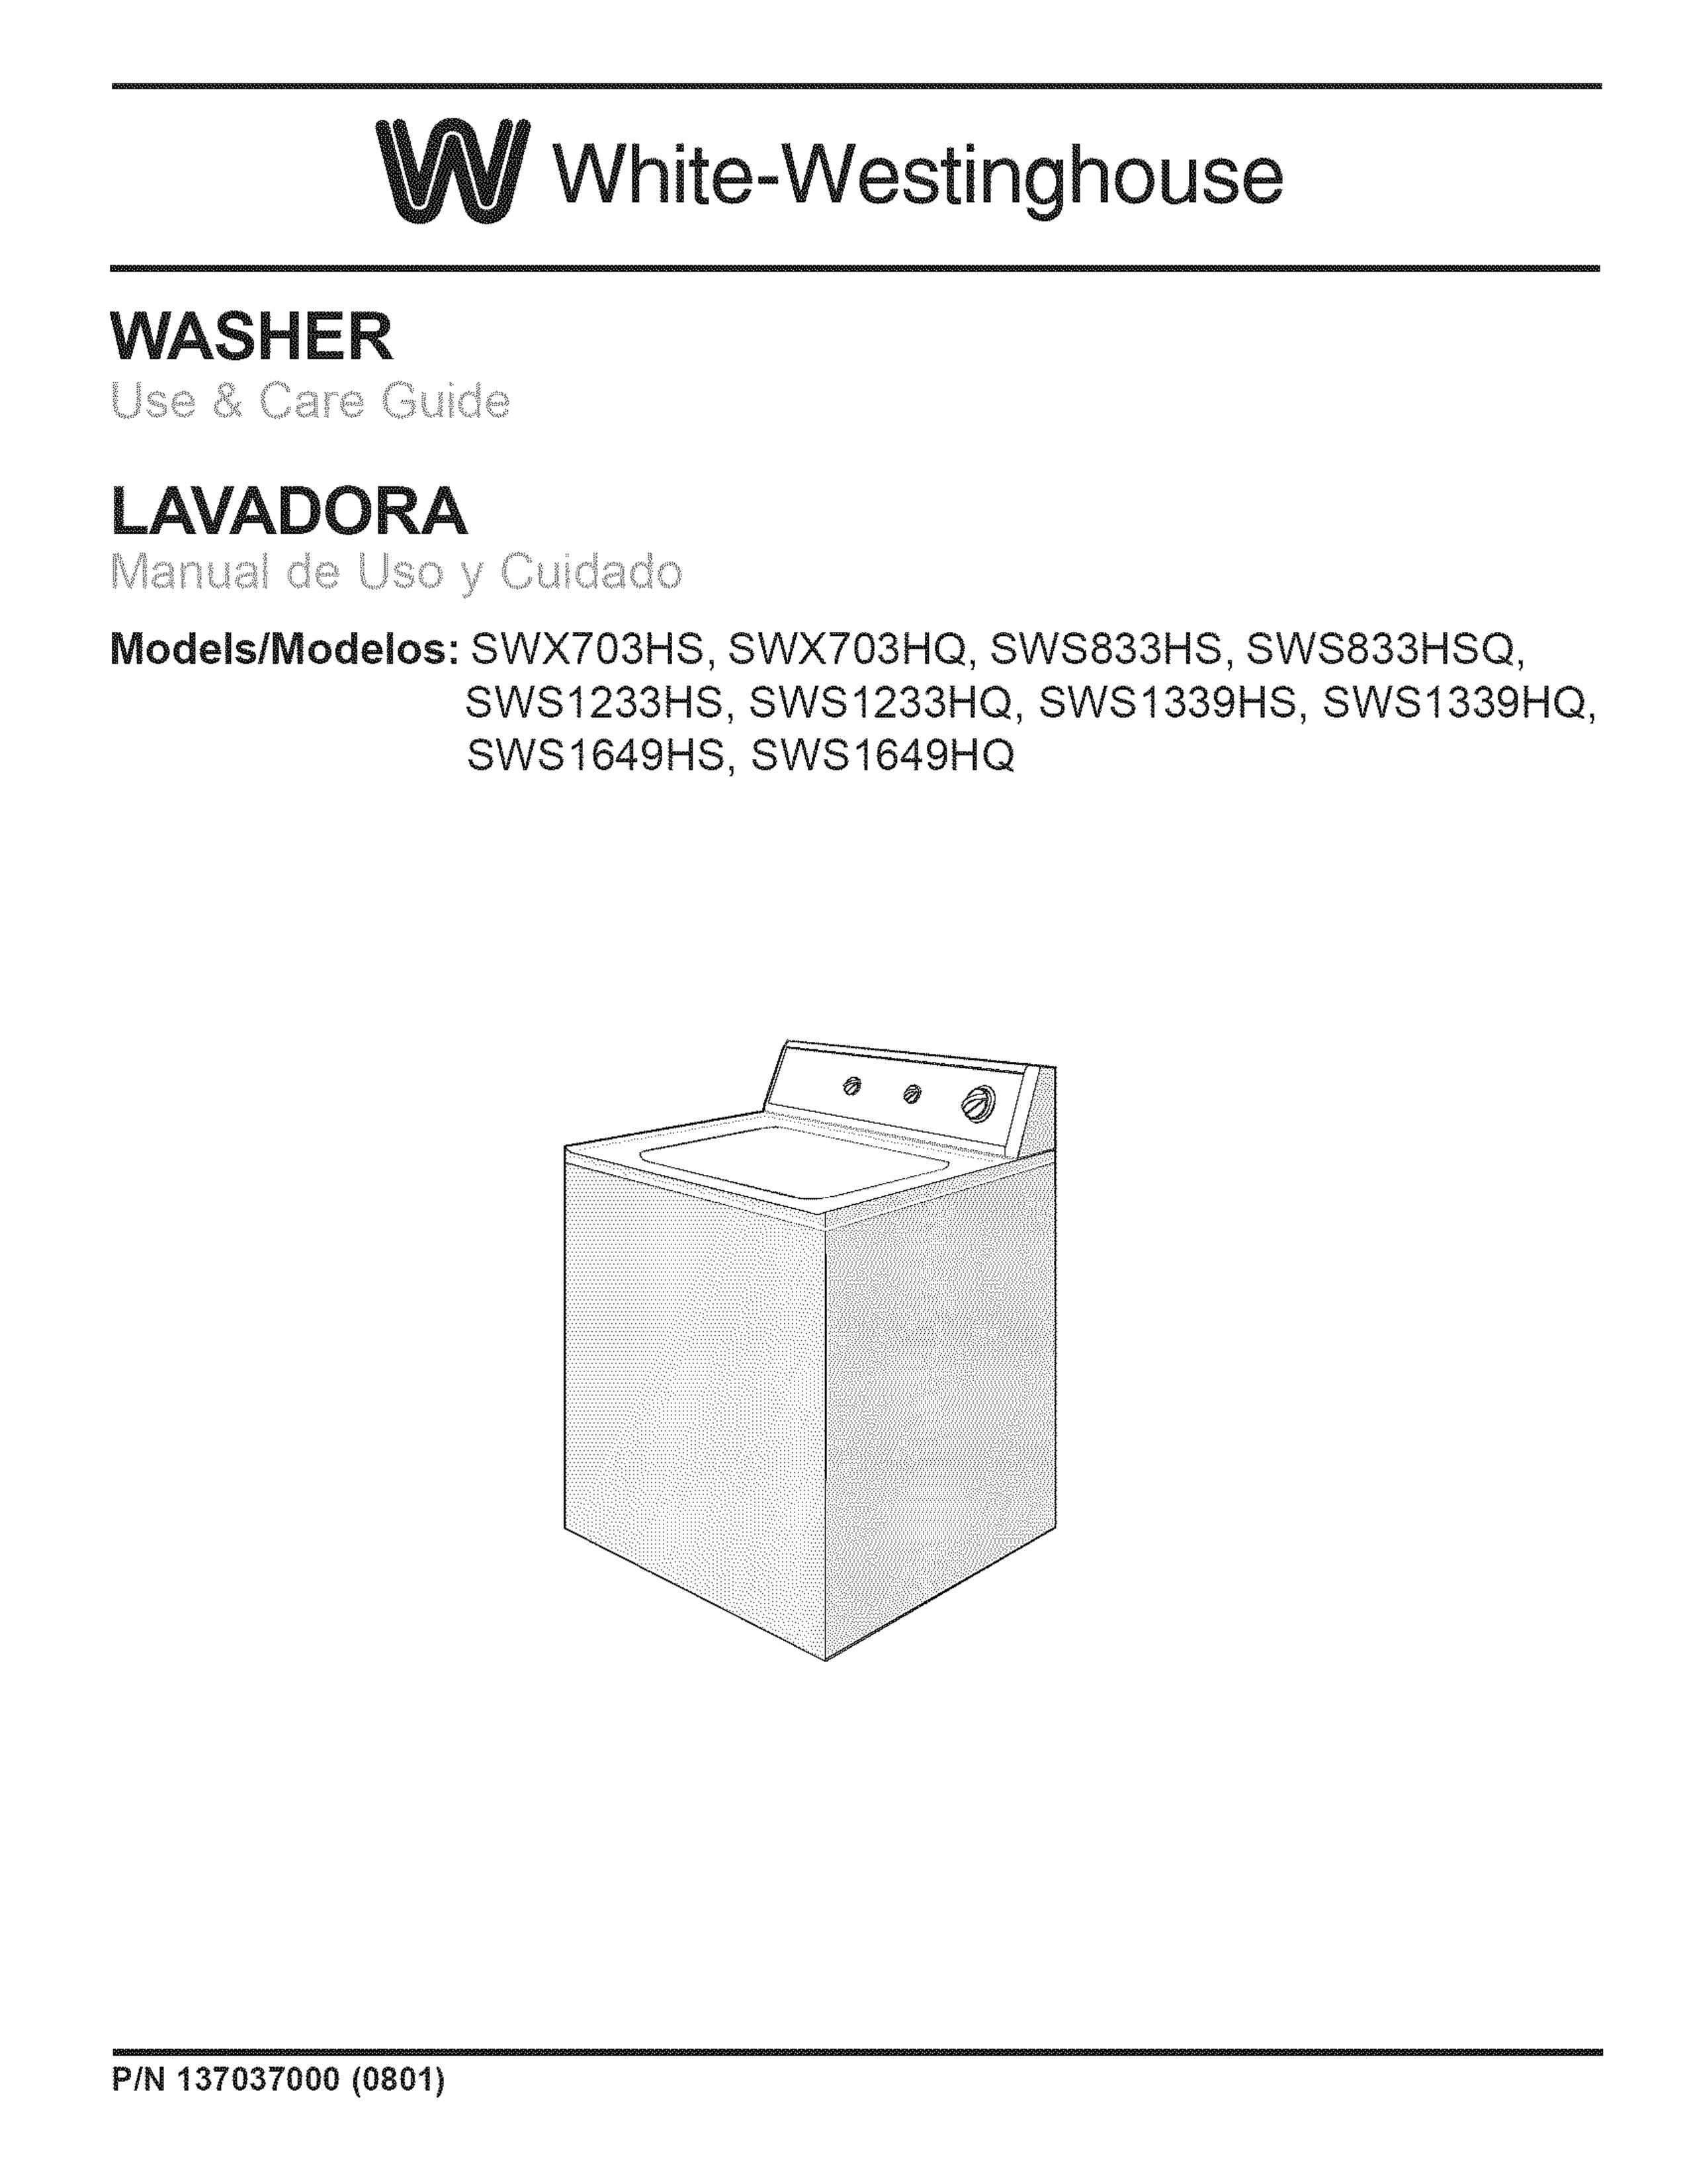 White-Westinghouse SWS1233HQ Washer User Manual